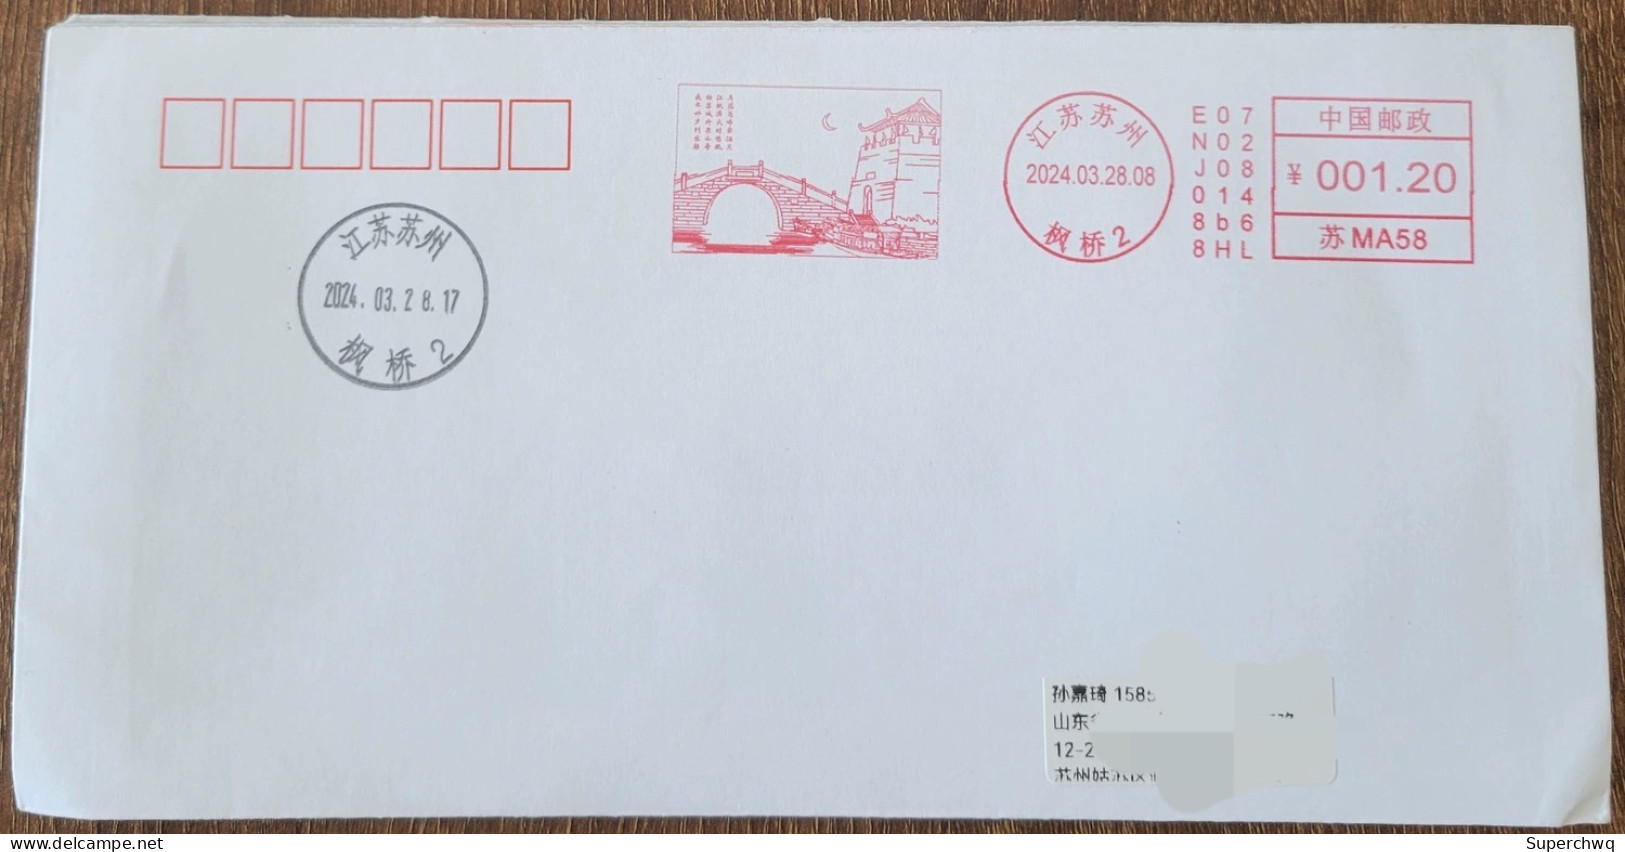 China Posted Cover，Fengqiao (Suzhou) Postage Machine Stamped First Day Actual Delivery Seal - Covers